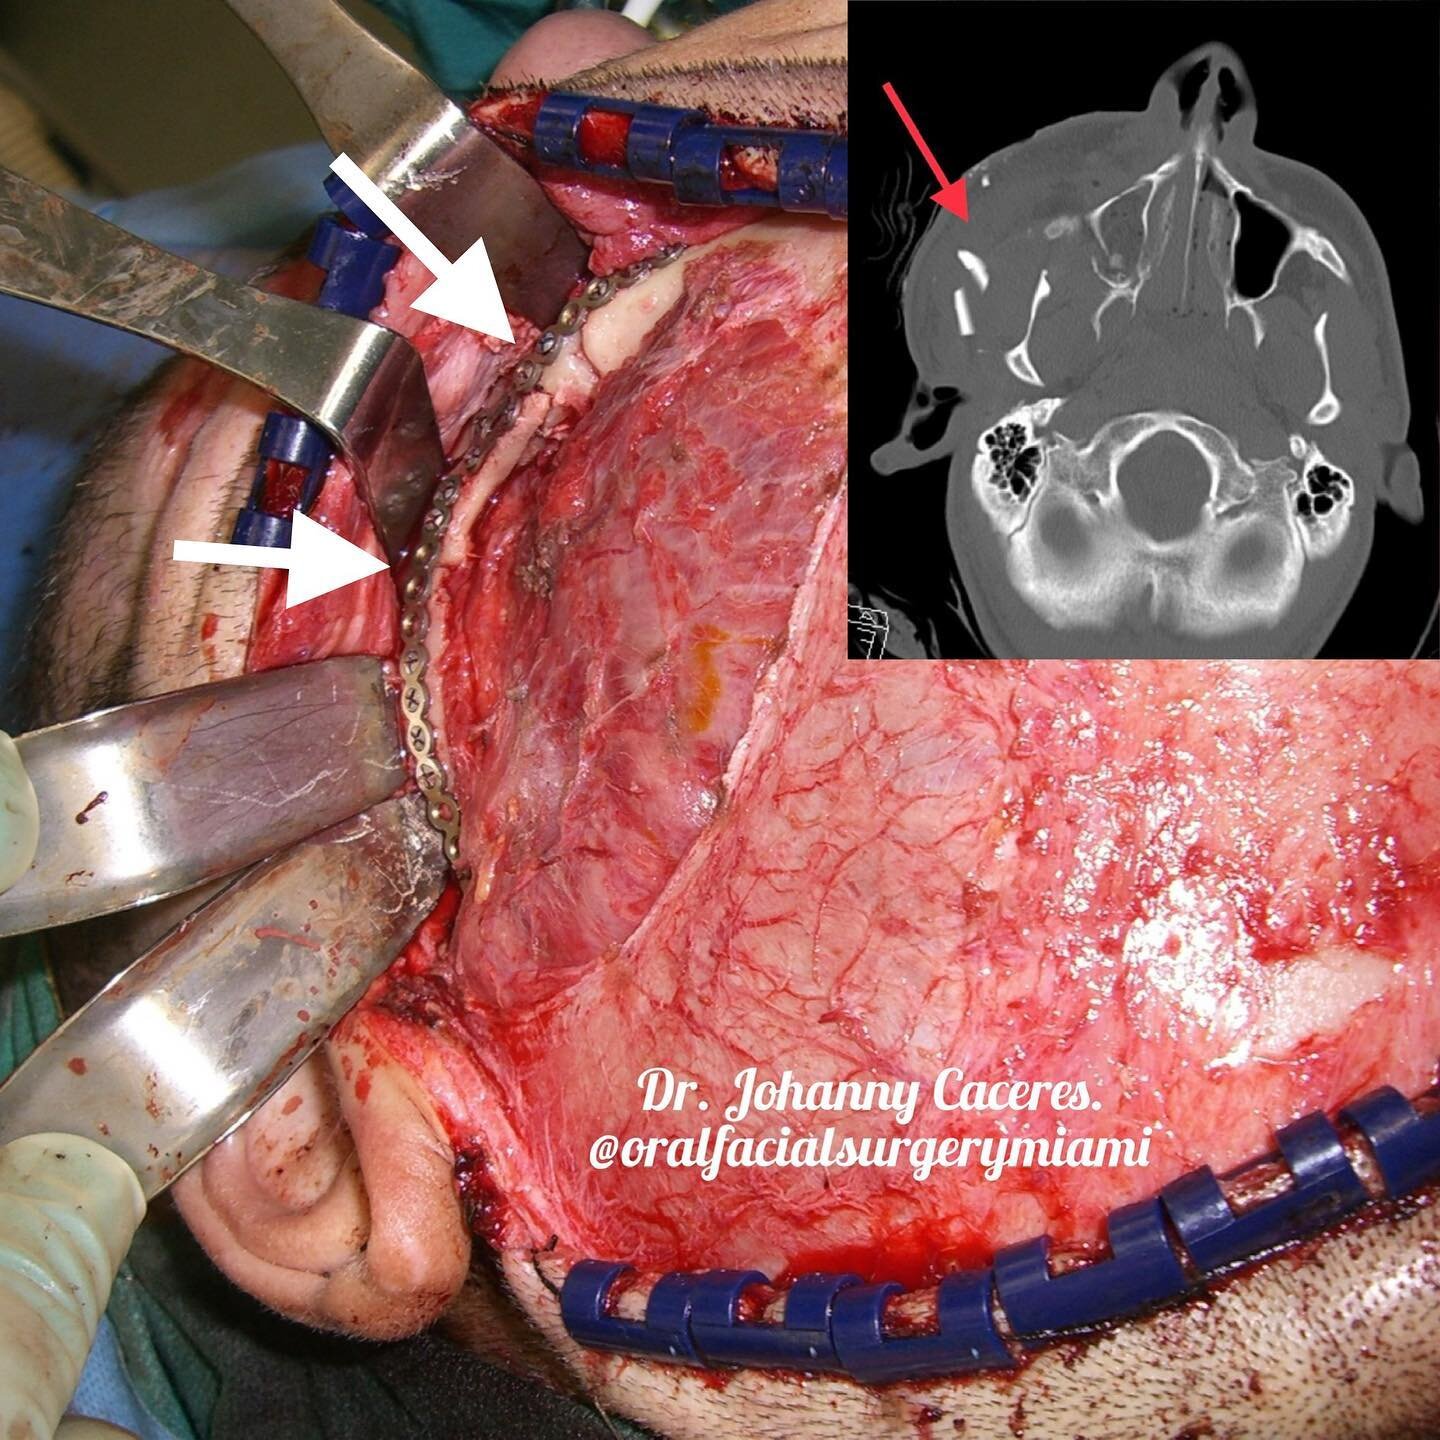 Open reduction internal fixation of a comminuted fracture of the left zygomatic arch via coronal approach. This patient was involved in a car accident and suffered panfacial fractures. 
Adequate reduction and fixation of the arch is very important to